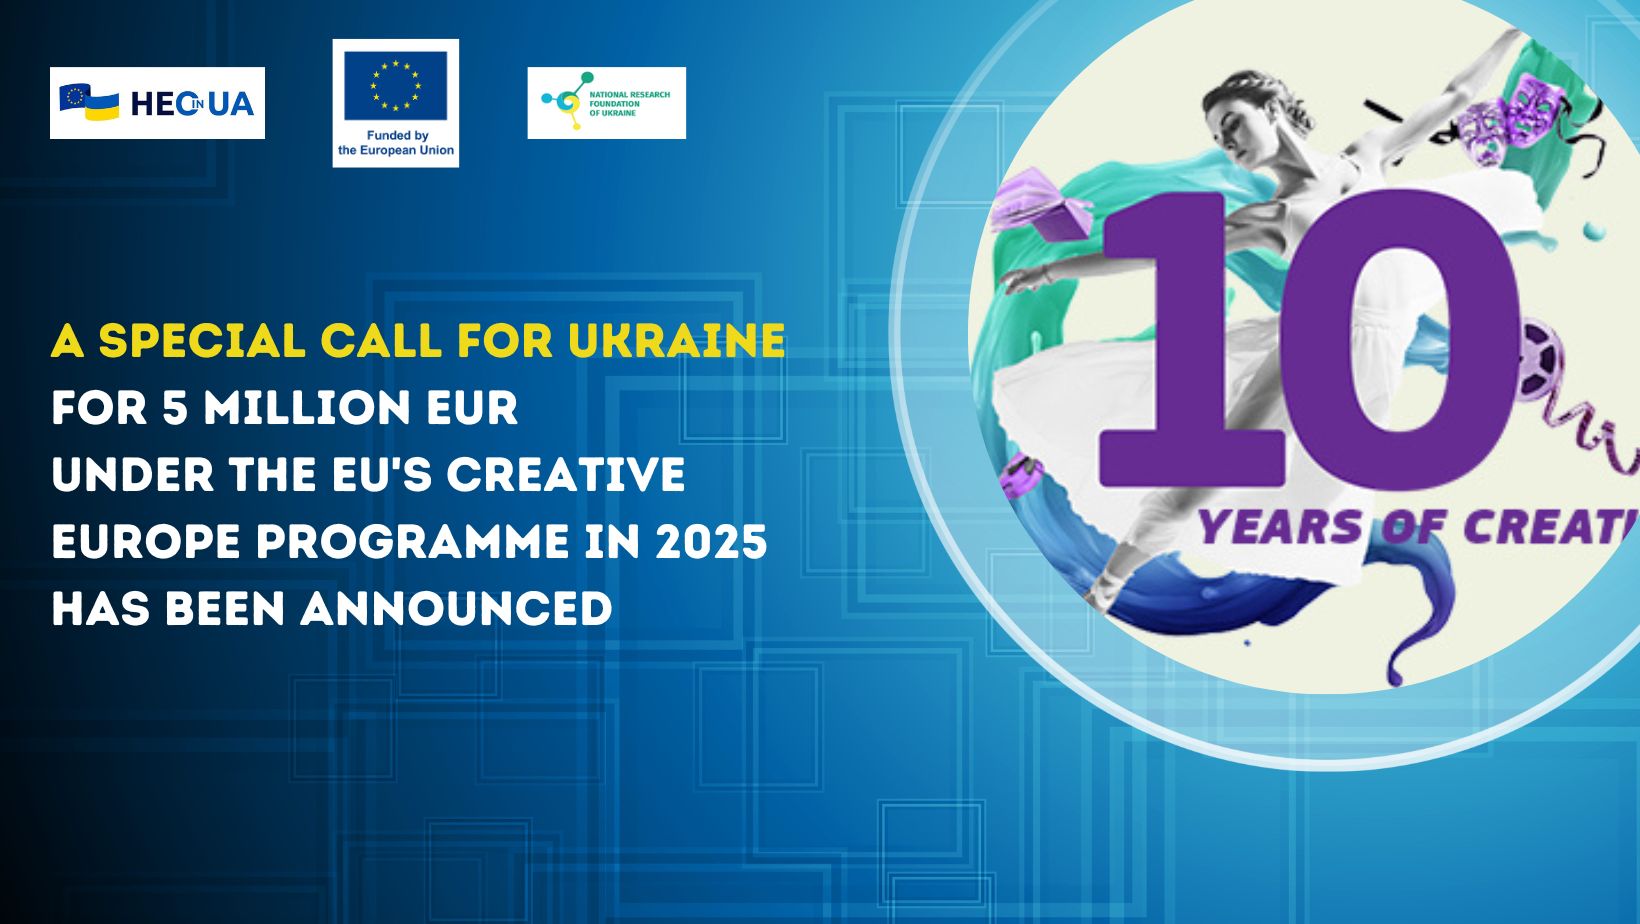 A special call for Ukraine for 5 million EUR under the EU’s Creative Europe Programme in 2025 has been announced